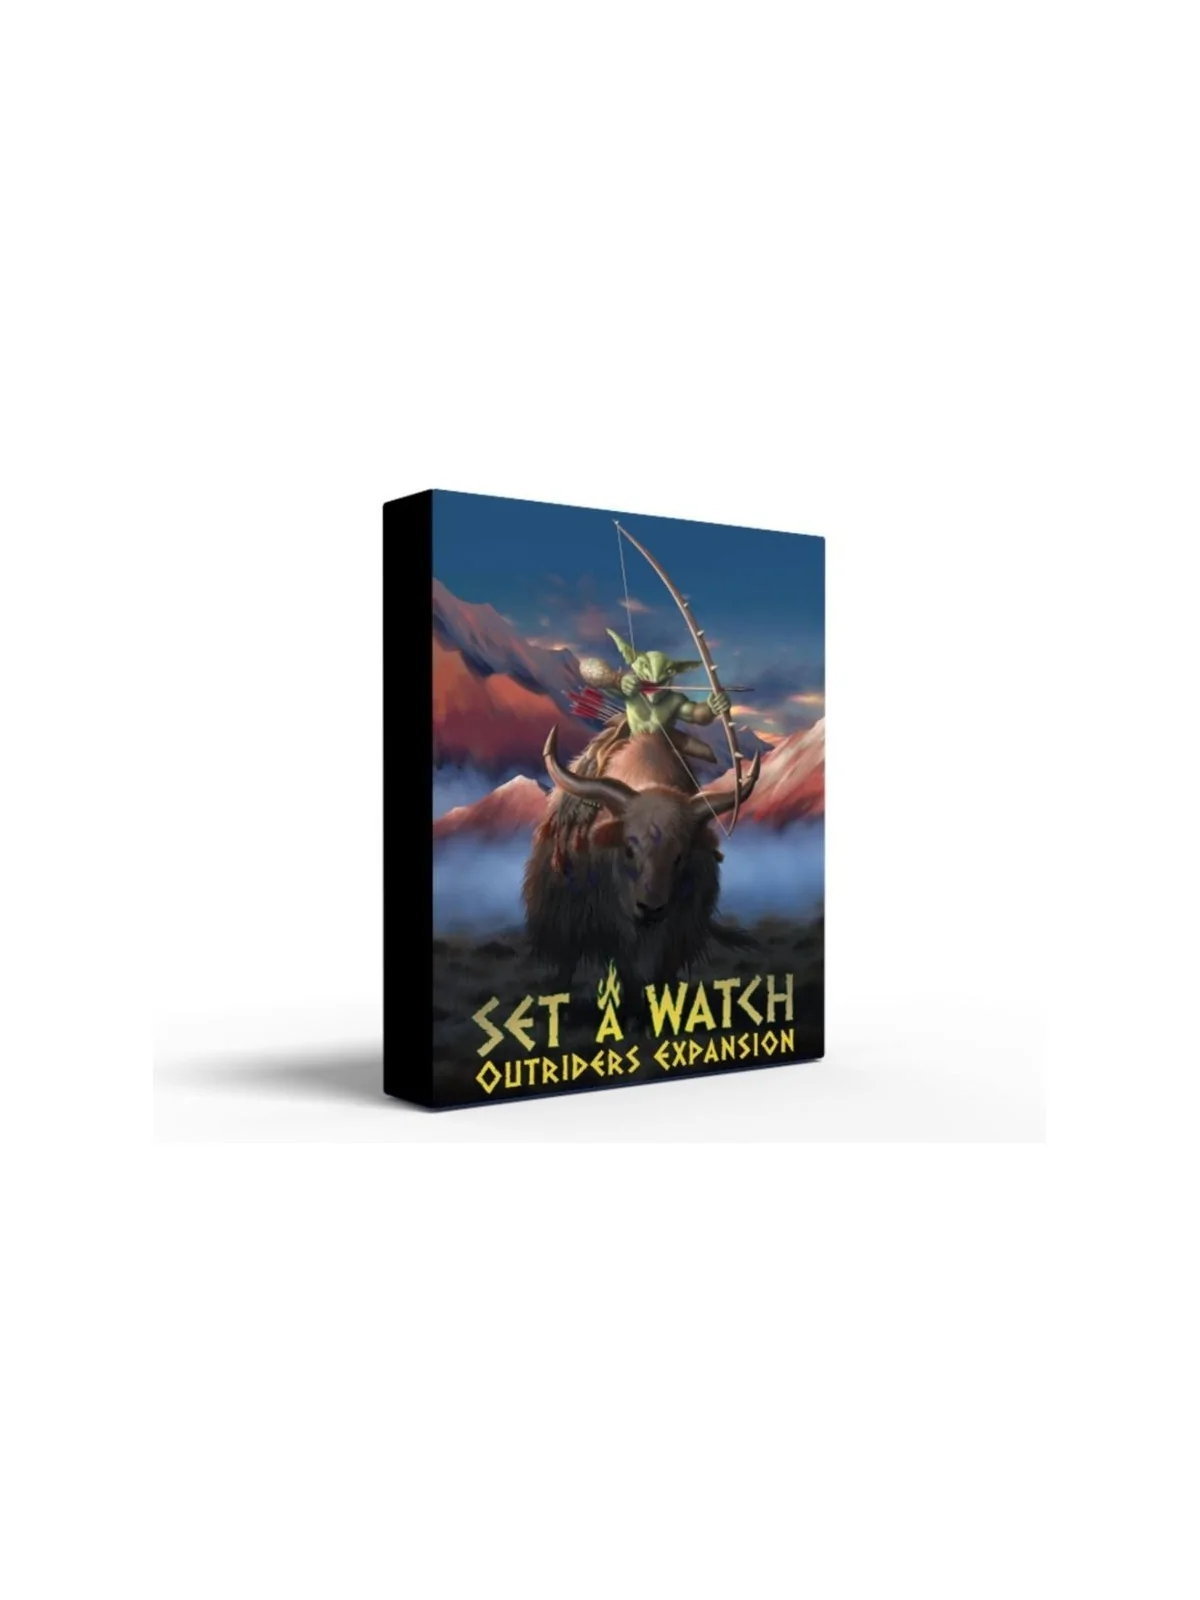 Comprar Set a Watch: Swords of the Coin - Outriders Expansion barato a